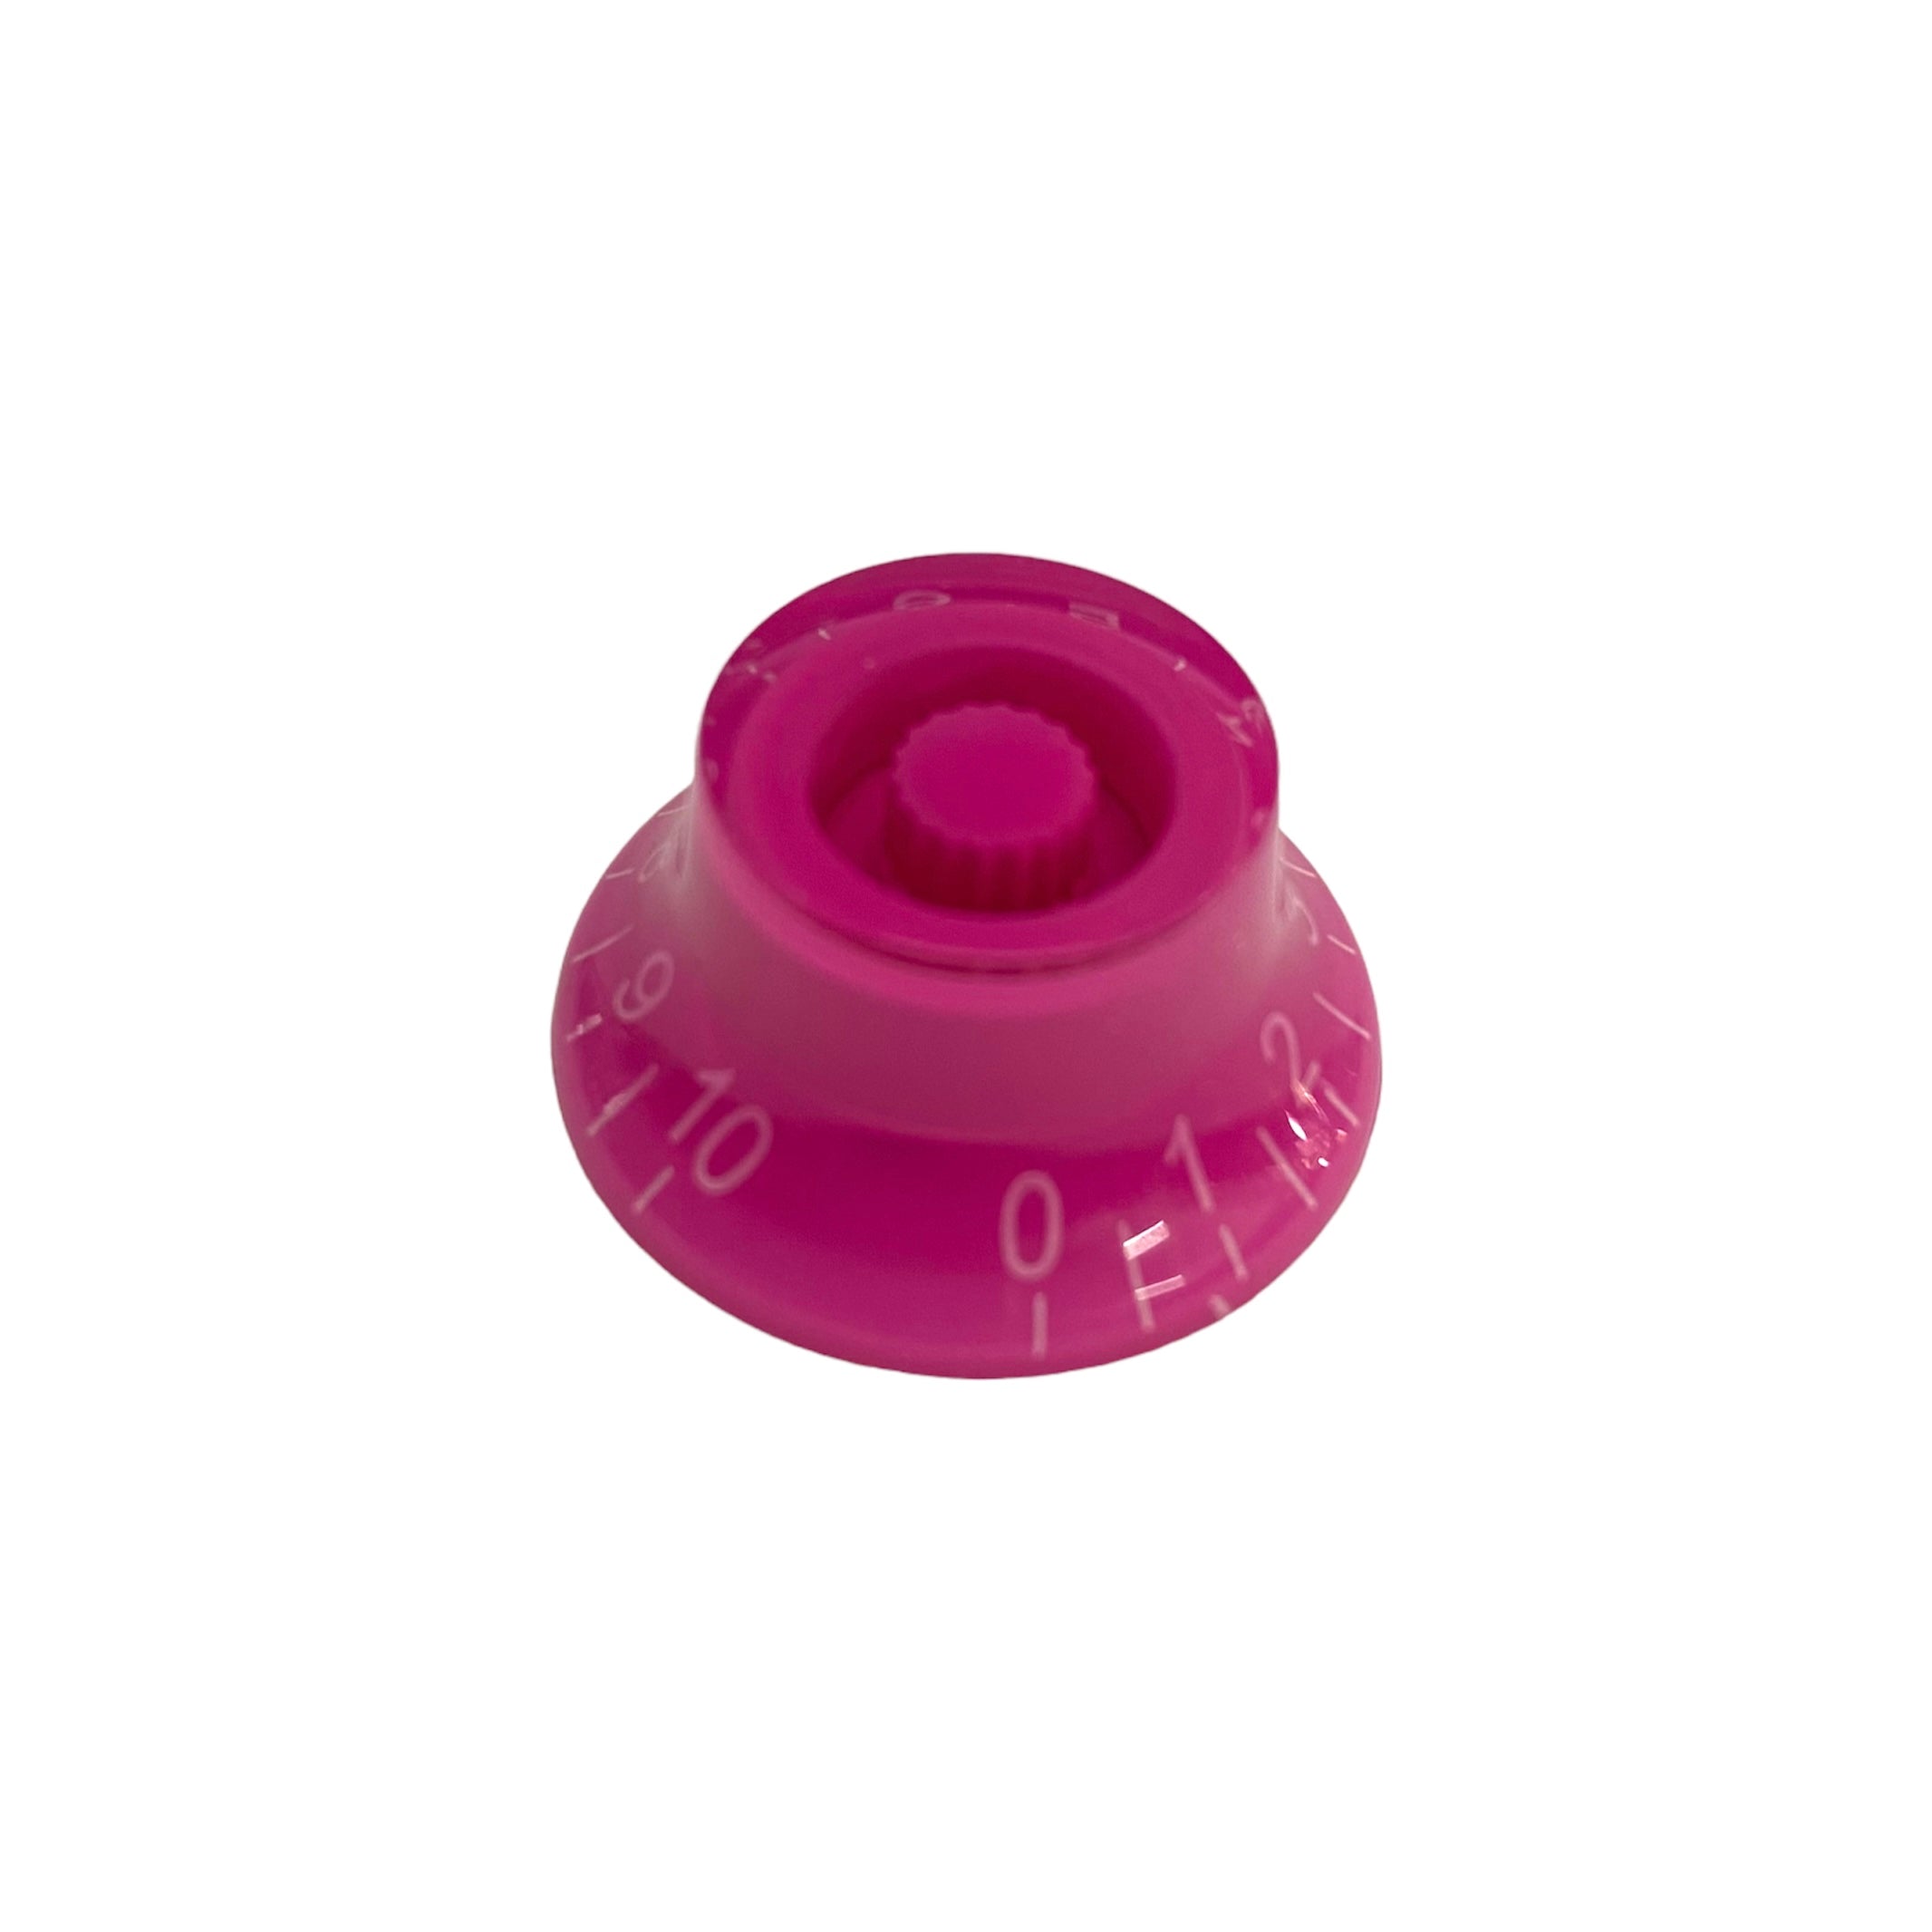 Knob - LP Tapered Style - Pink/White